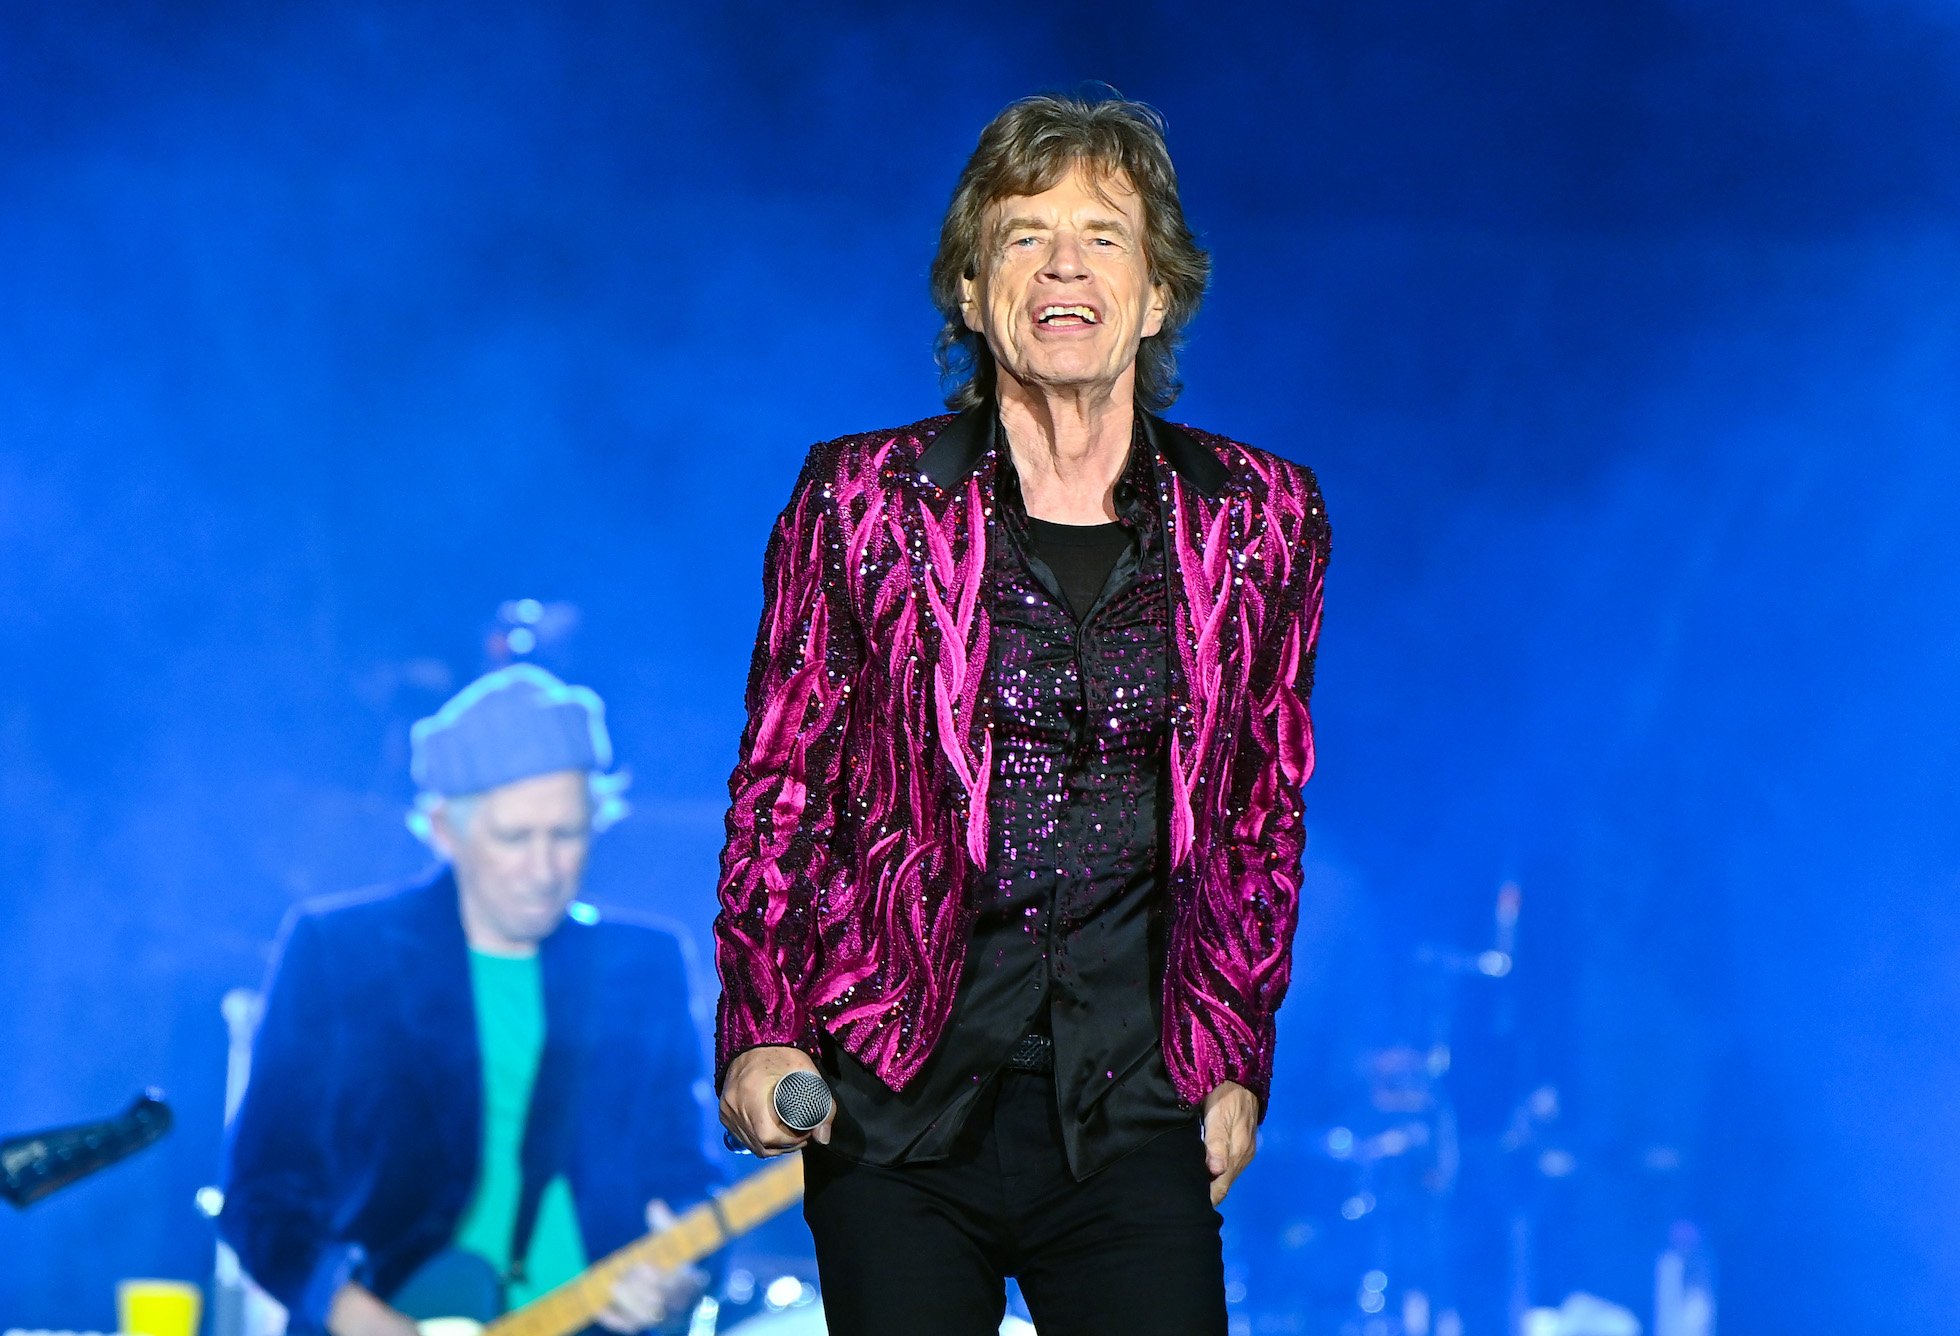 Mick Jagger performs with The Rolling Stones in Atlanta, Georgia